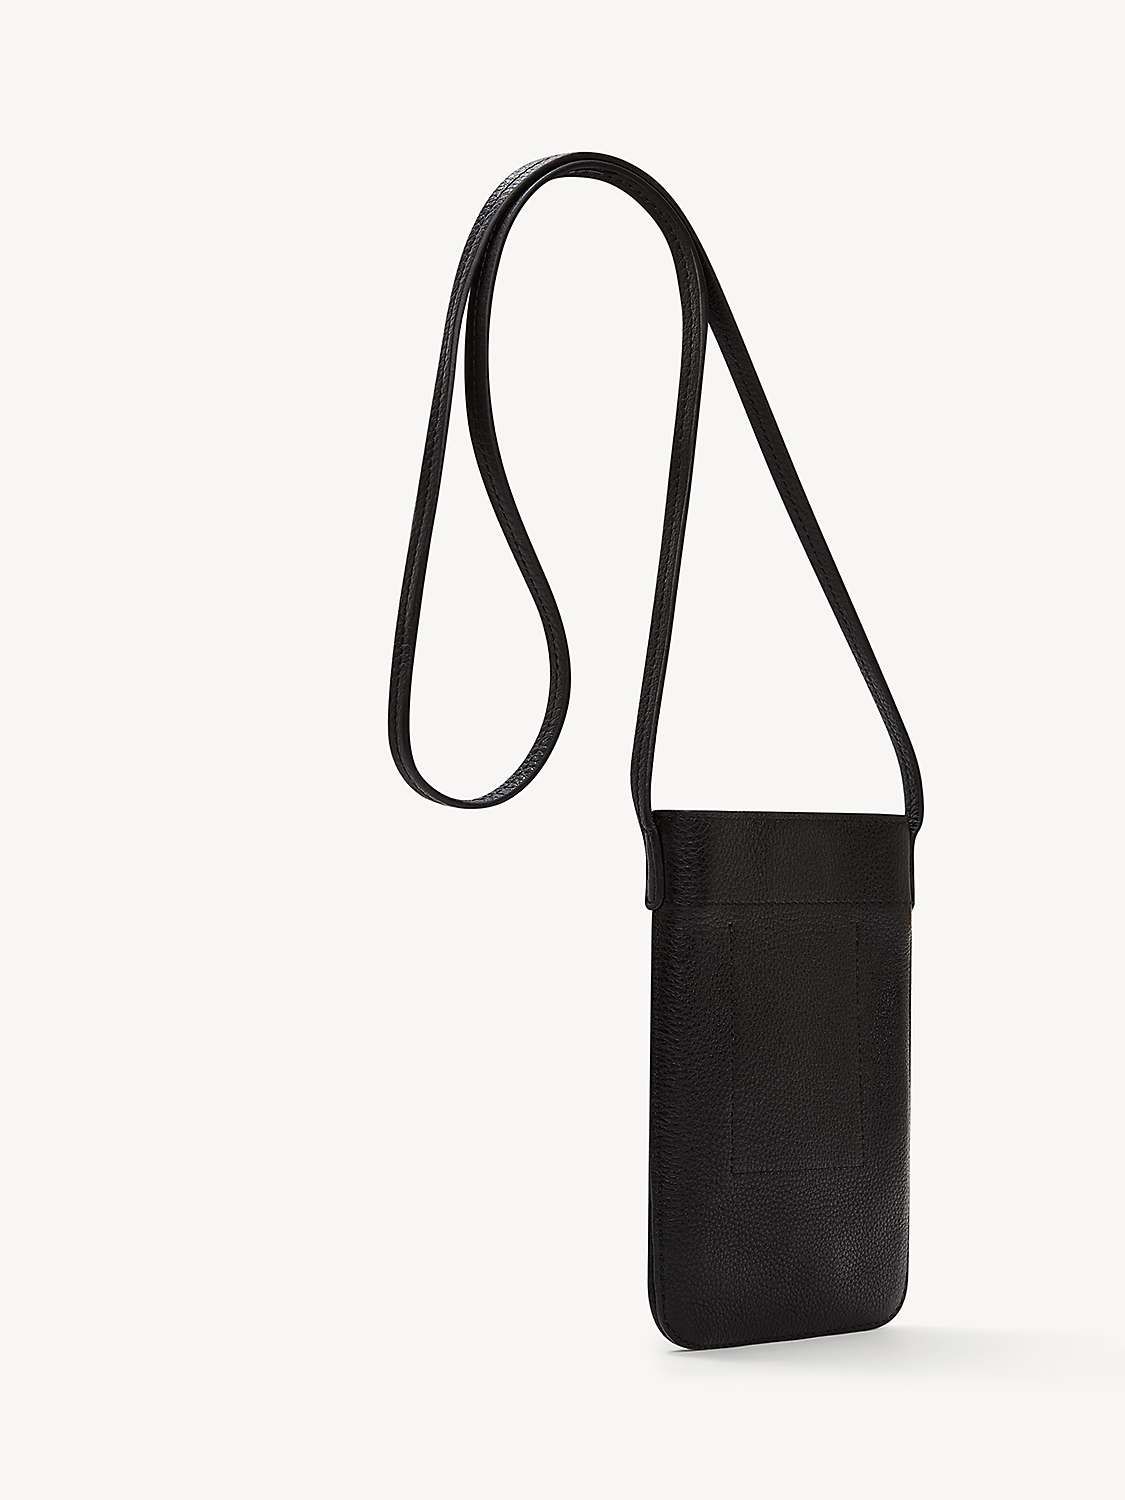 Buy Gerard Darel Ladyphone Small Grained Leather Bag Online at johnlewis.com